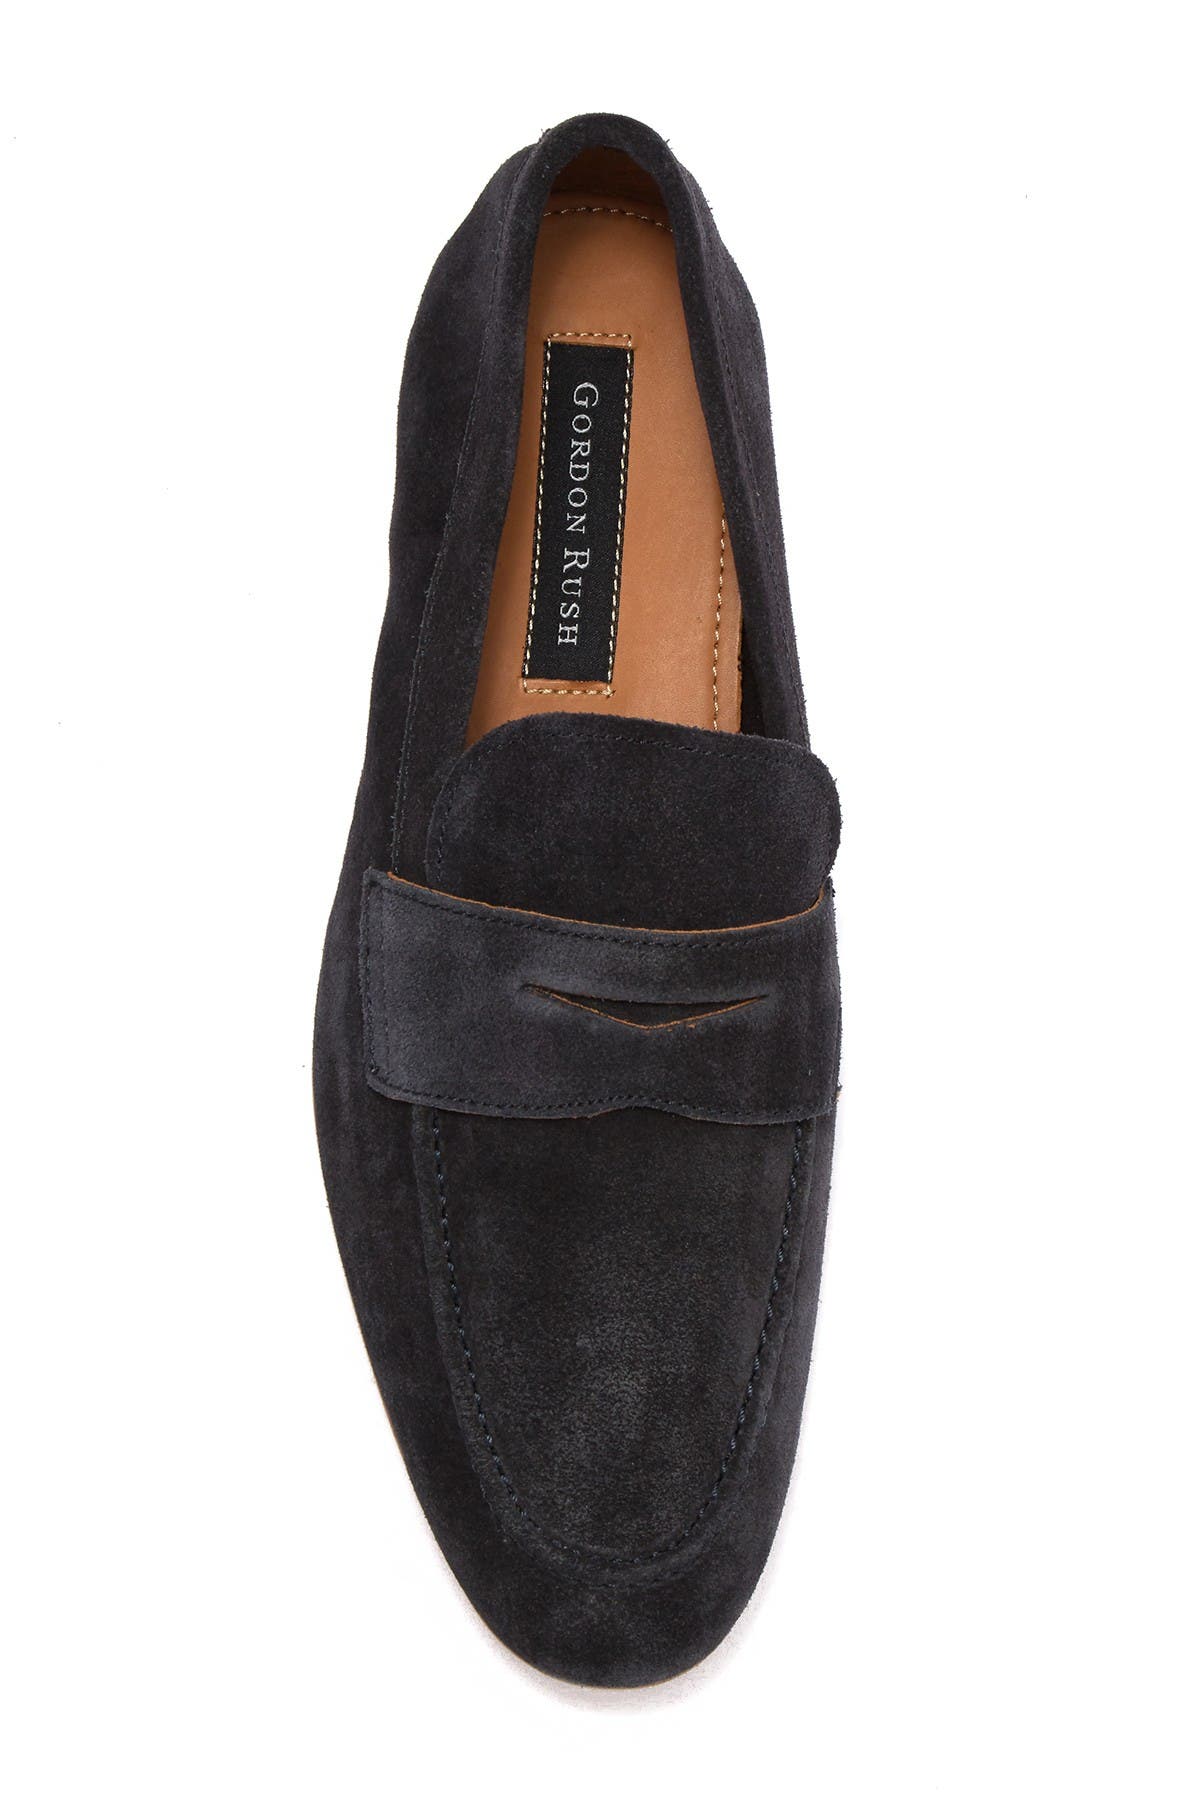 Gordon Rush | Wilfred Penny Loafer 